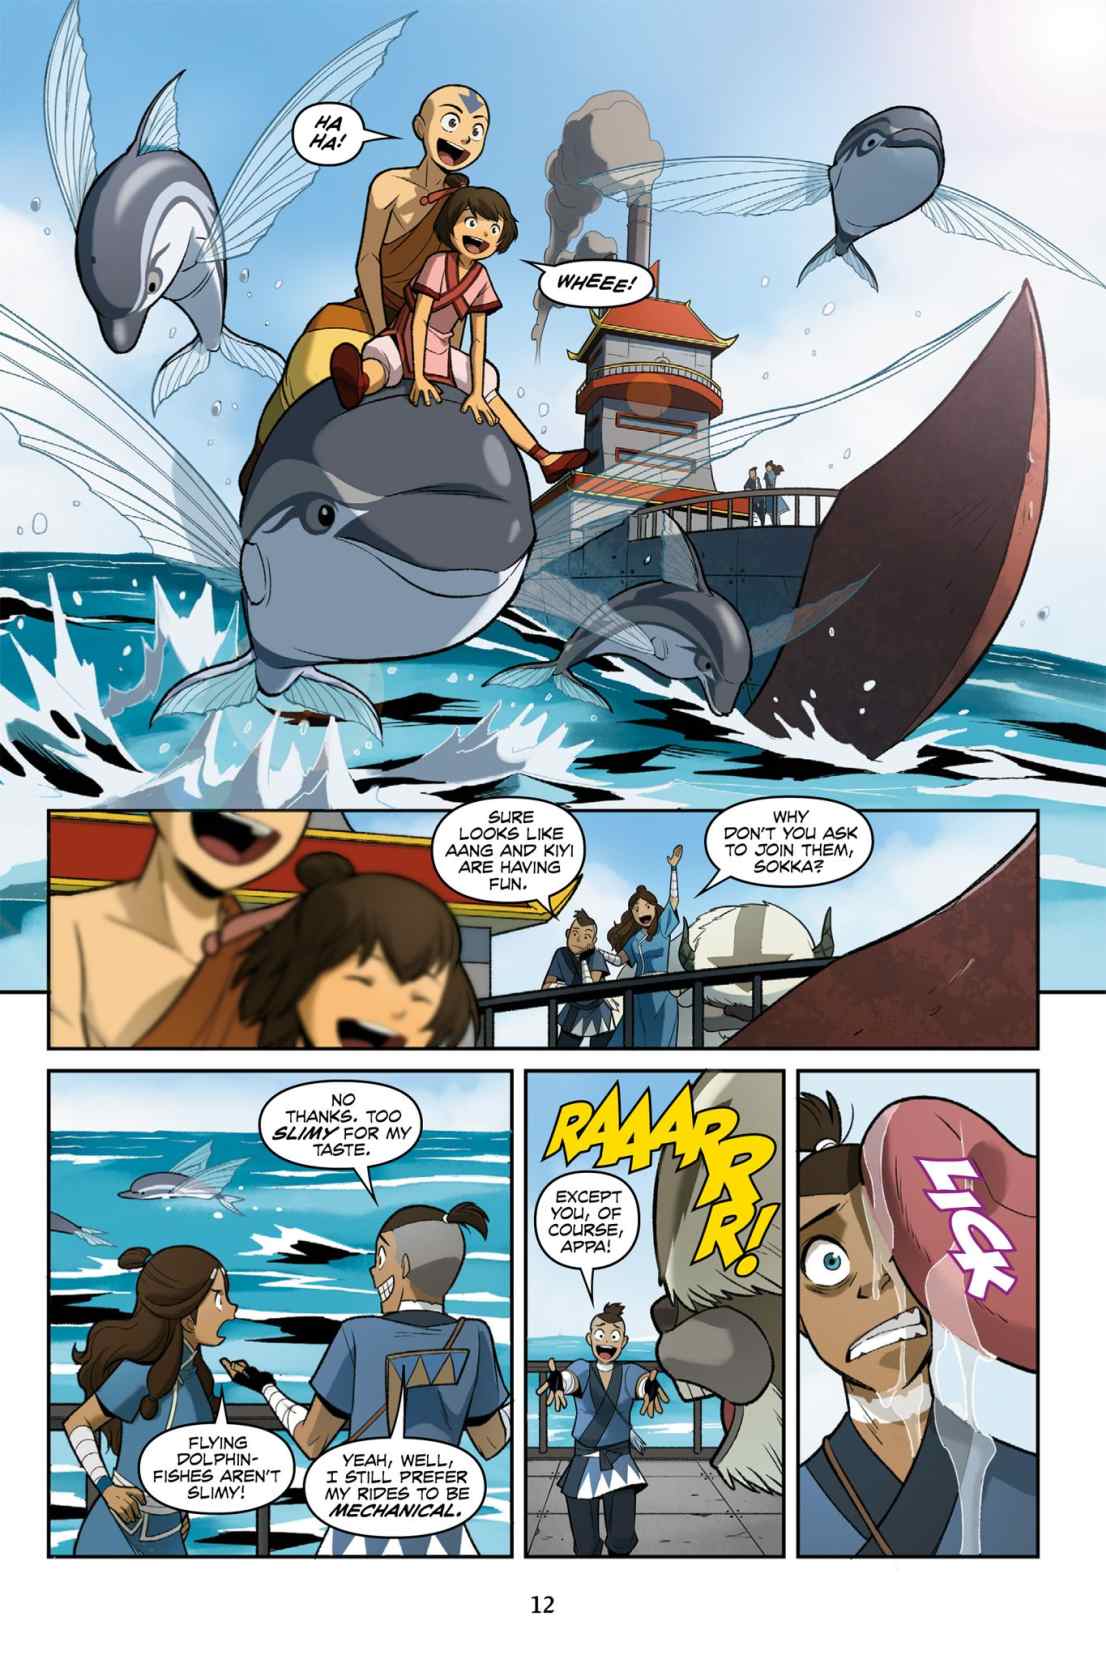 Read Comics Online Free - Avatar The Last Airbender Comic Book Issue #010 -  Page 12